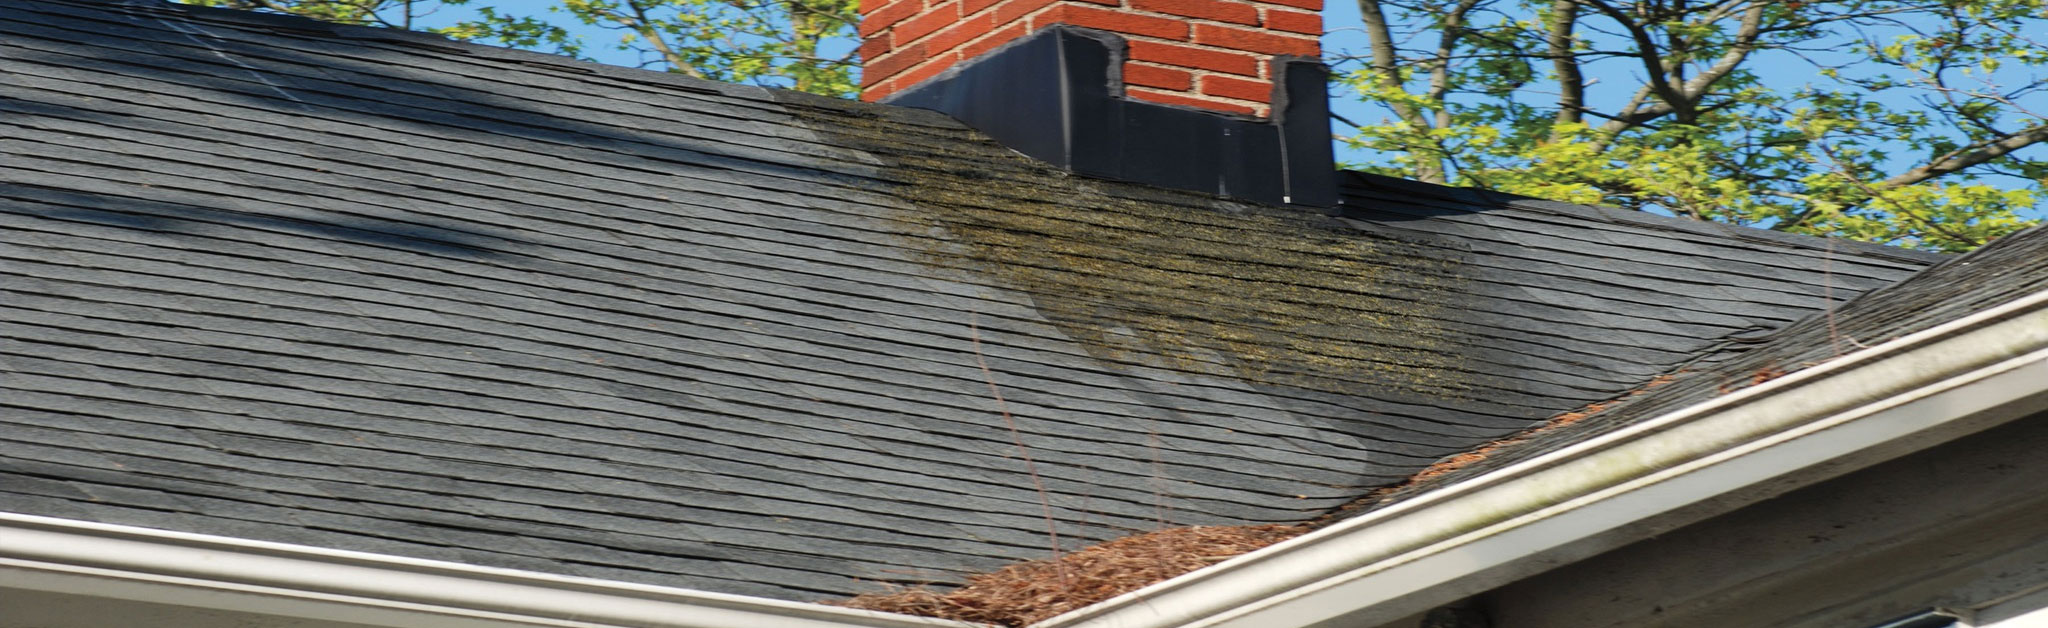 JL McCormick Roofing Images